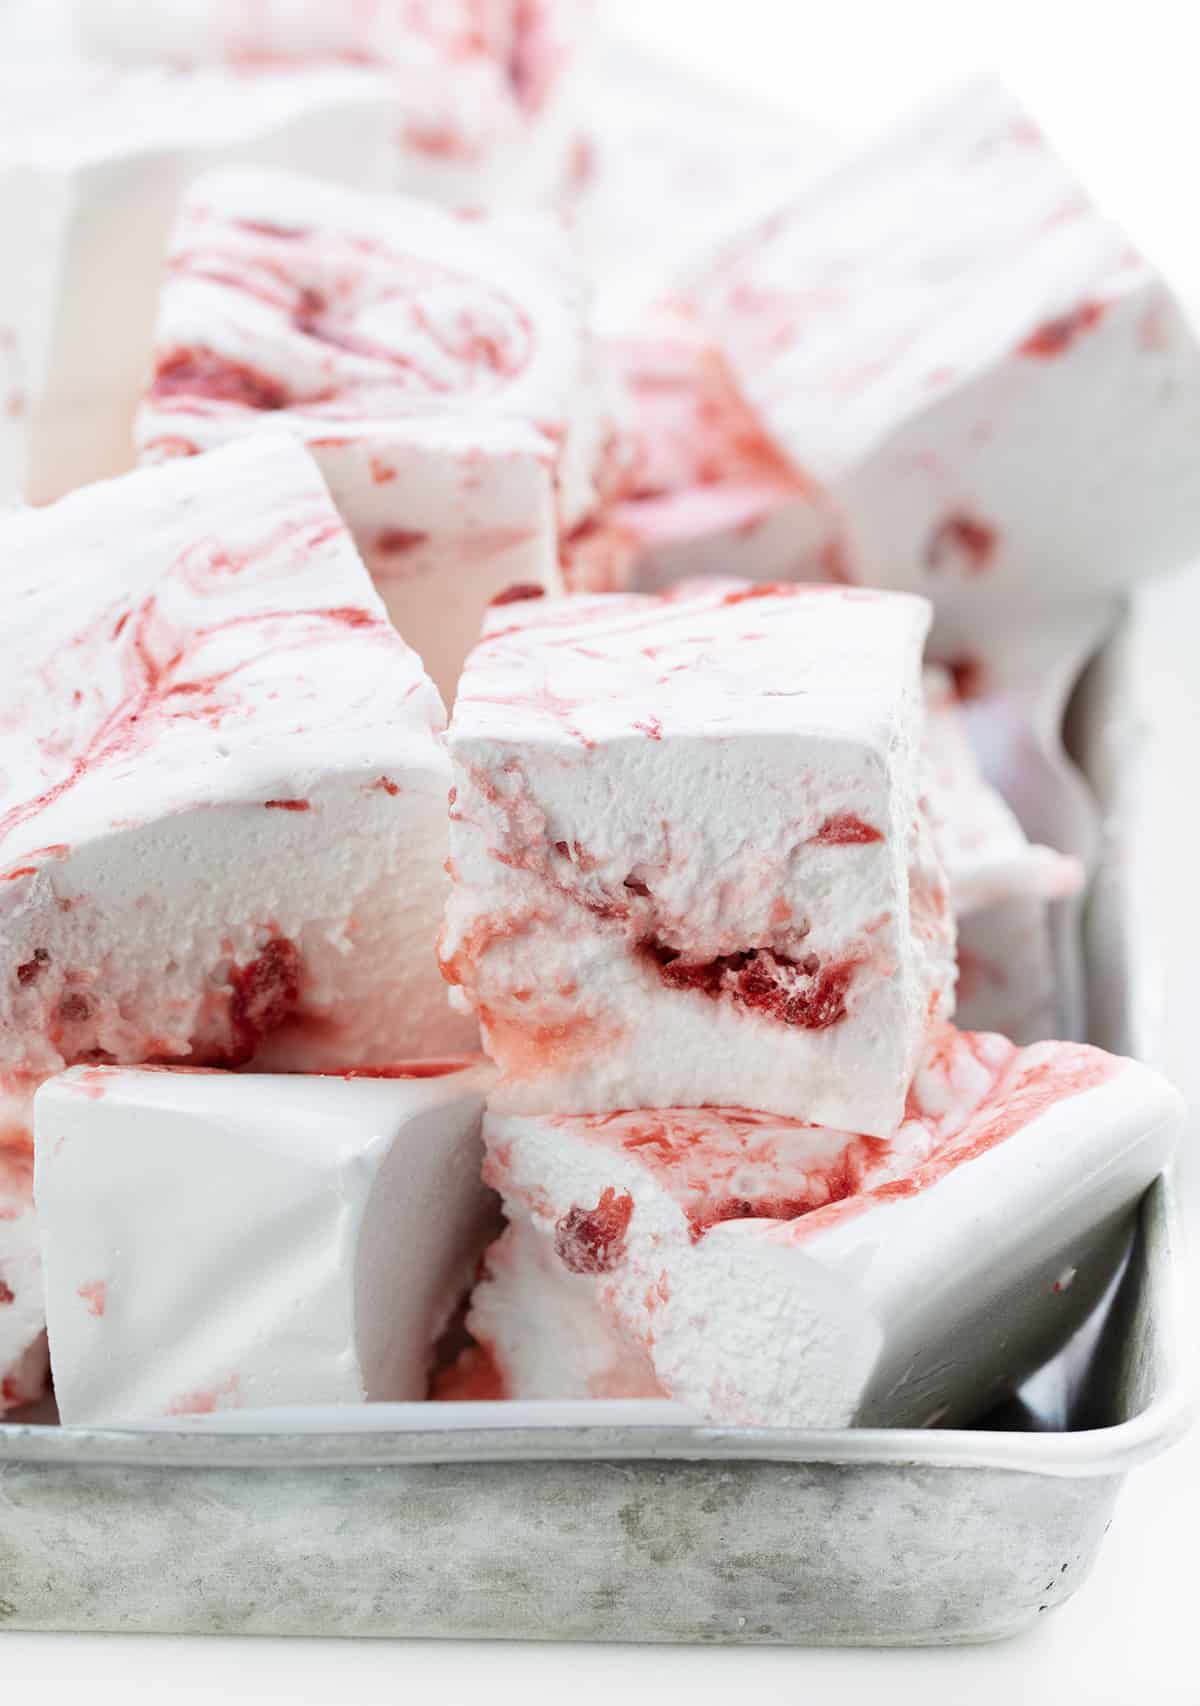 Cut up Strawberry Marshmallows in a Pan.